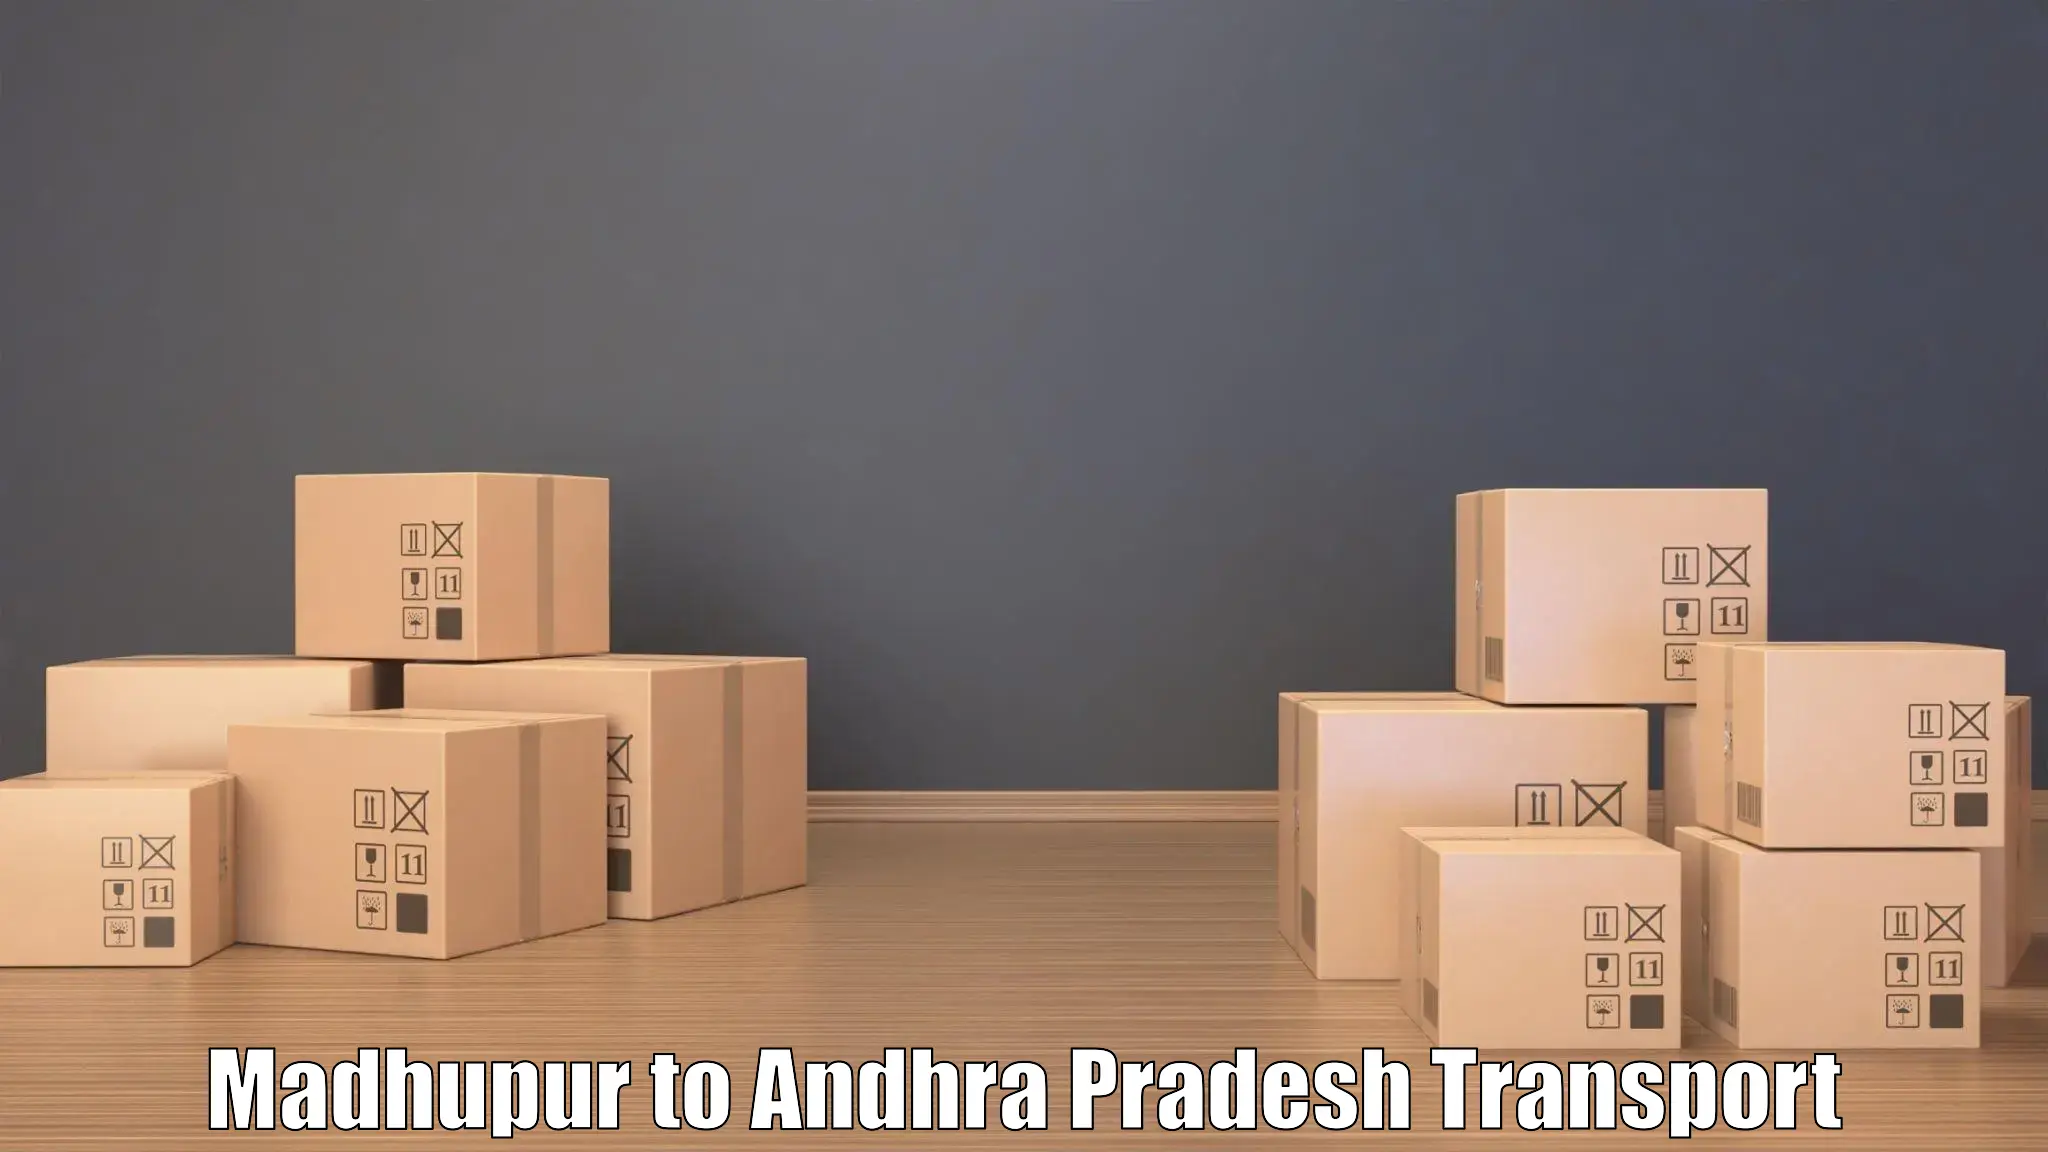 Shipping services in Madhupur to Puttur Tirupati